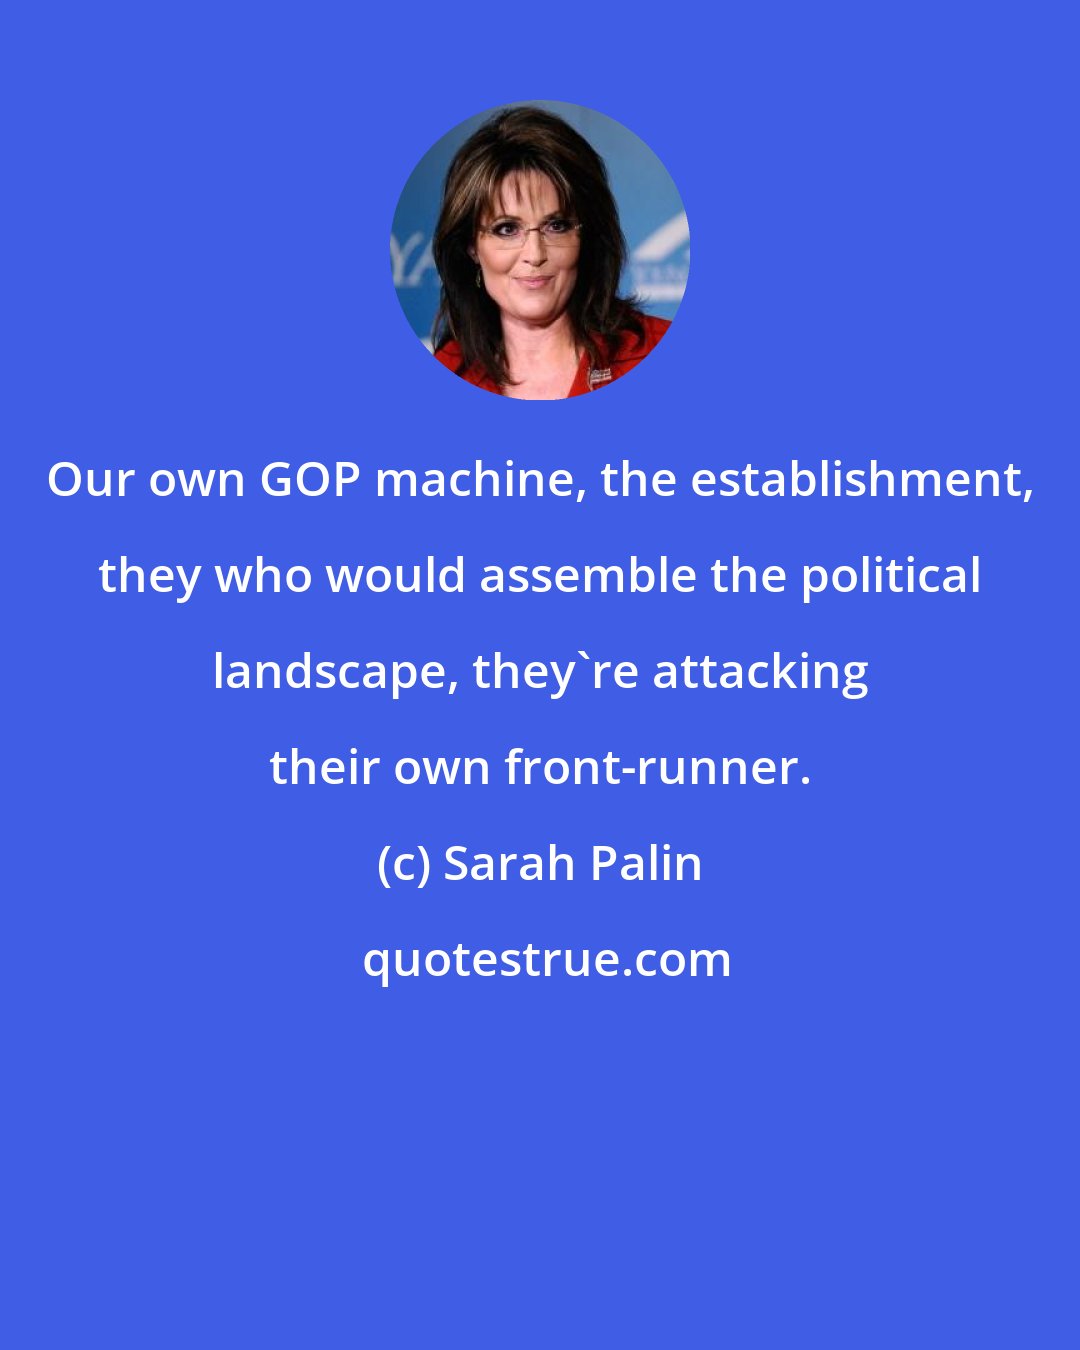 Sarah Palin: Our own GOP machine, the establishment, they who would assemble the political landscape, they're attacking their own front-runner.